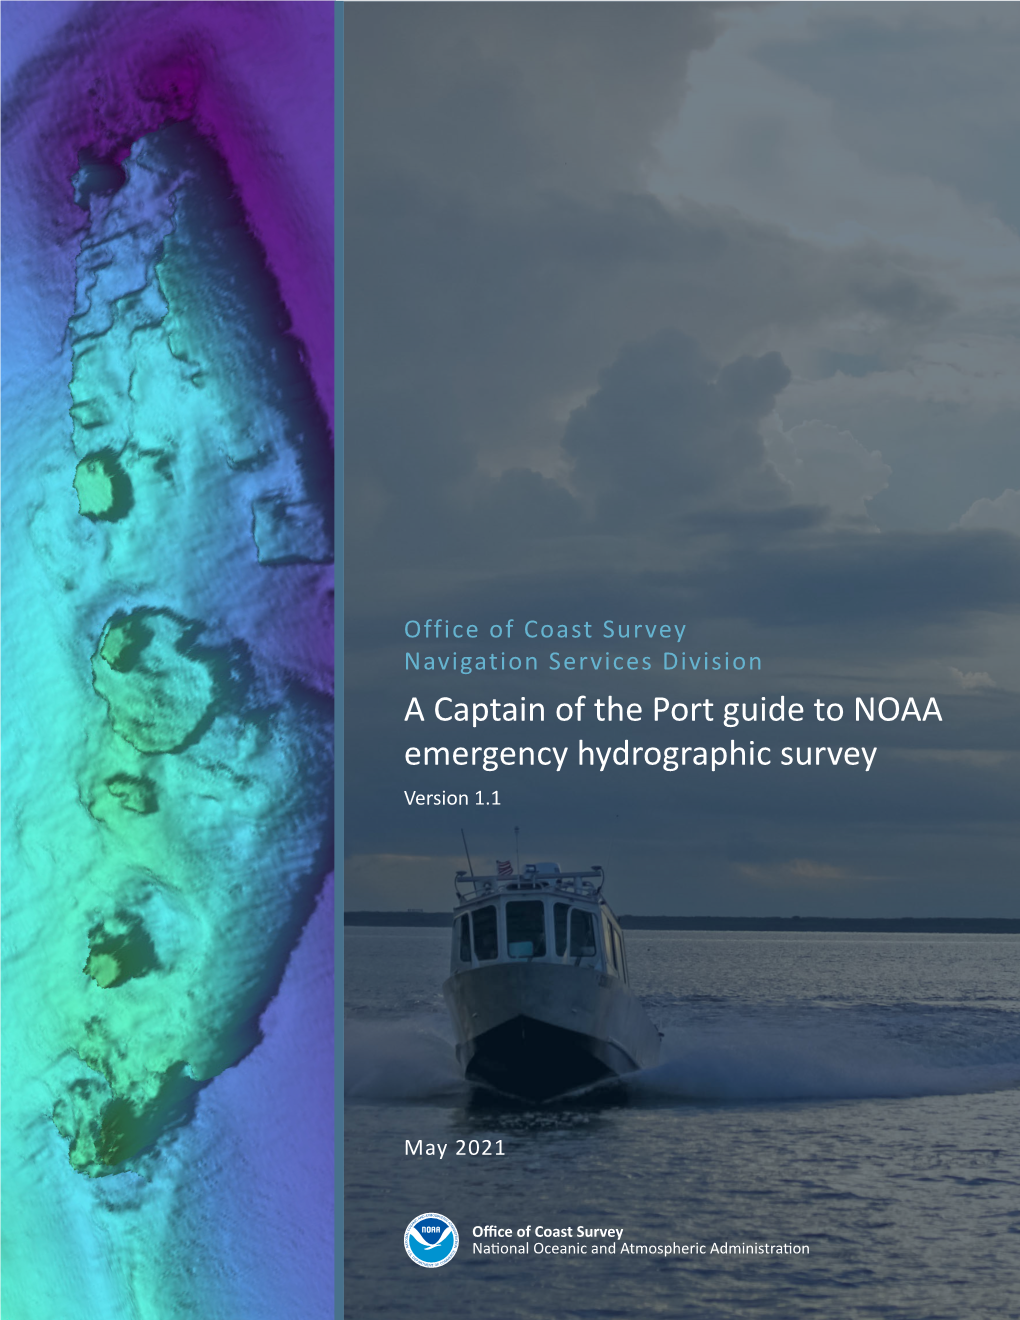 A Captain of the Port's Guide to NOAA Emergency Hydrographic Survey